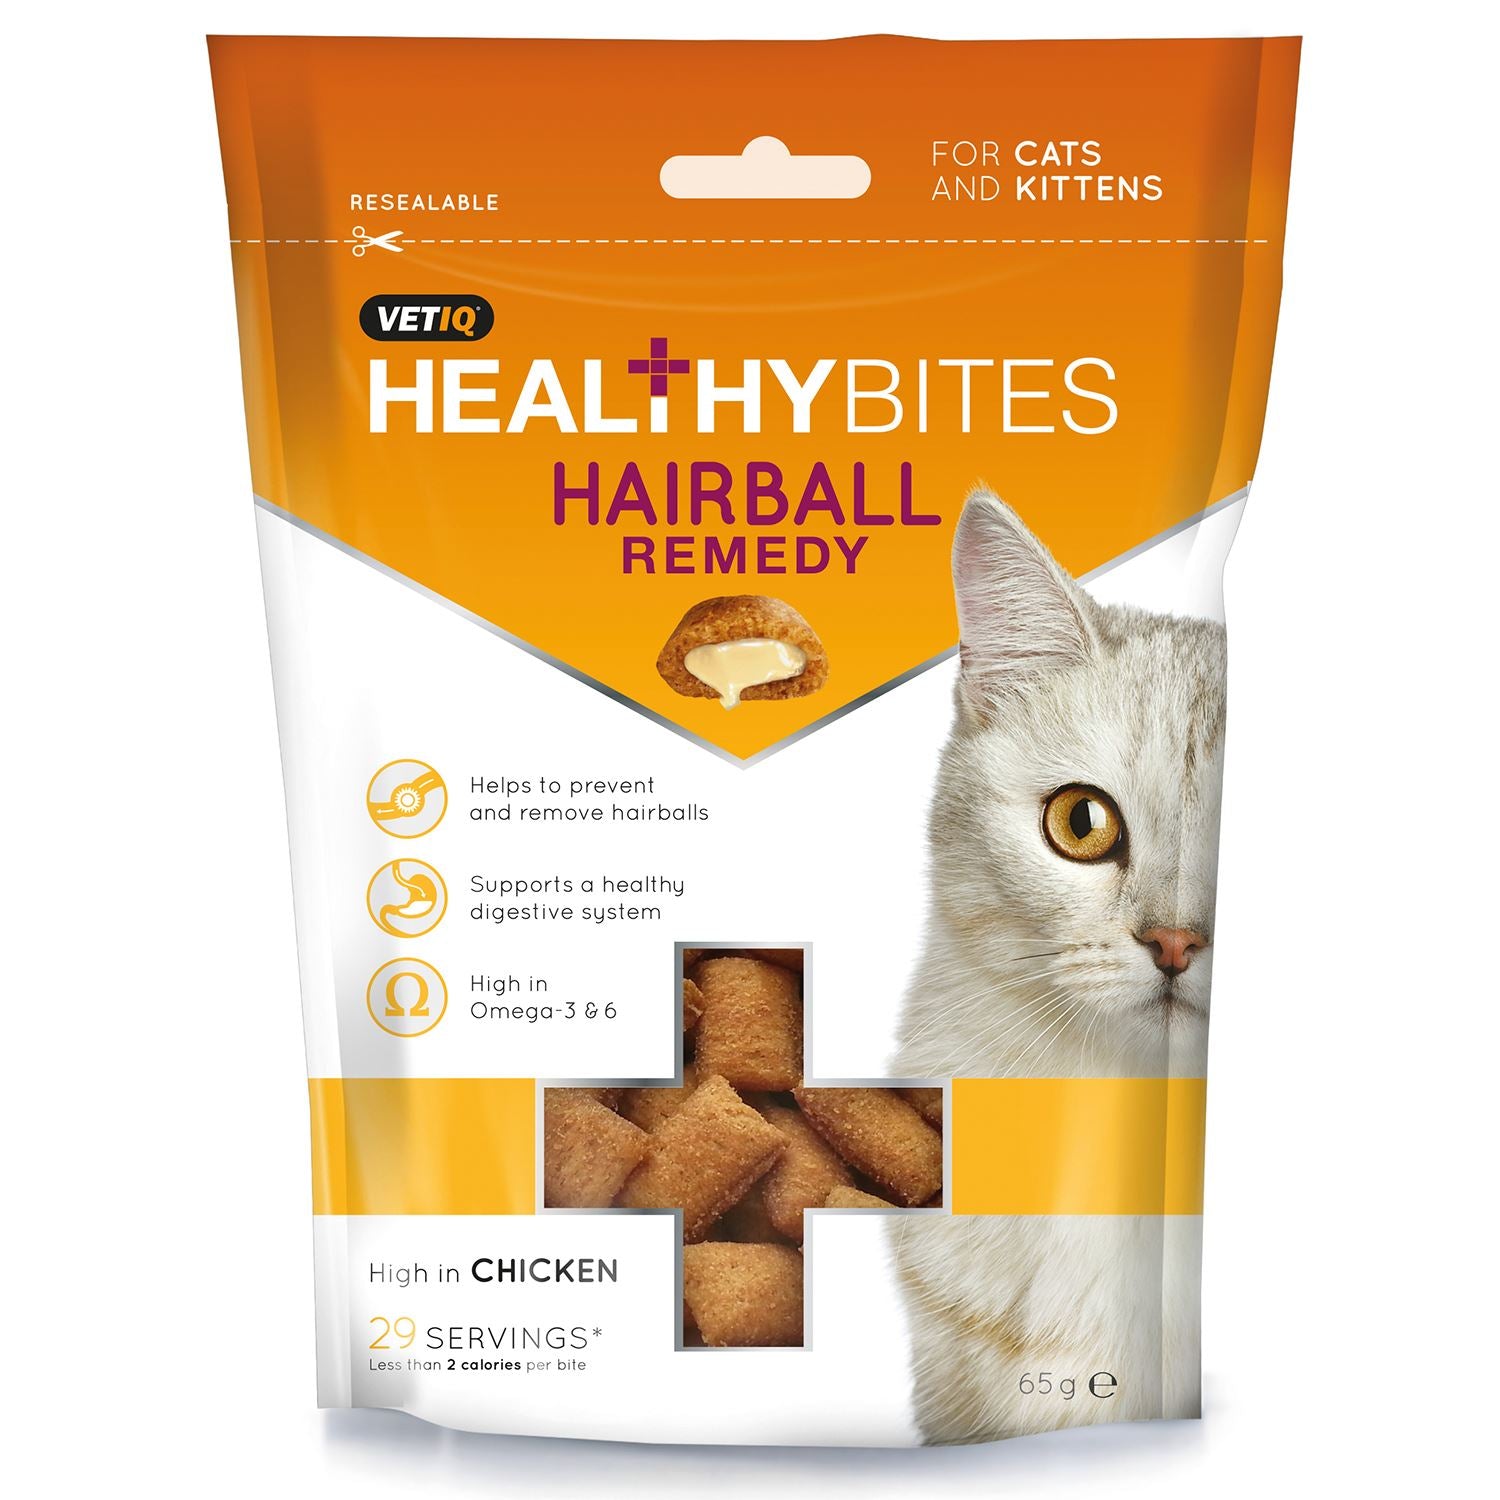 Vetiq Healthy Bites Hairball Remedy For Cats & Kittens - Just Horse Riders